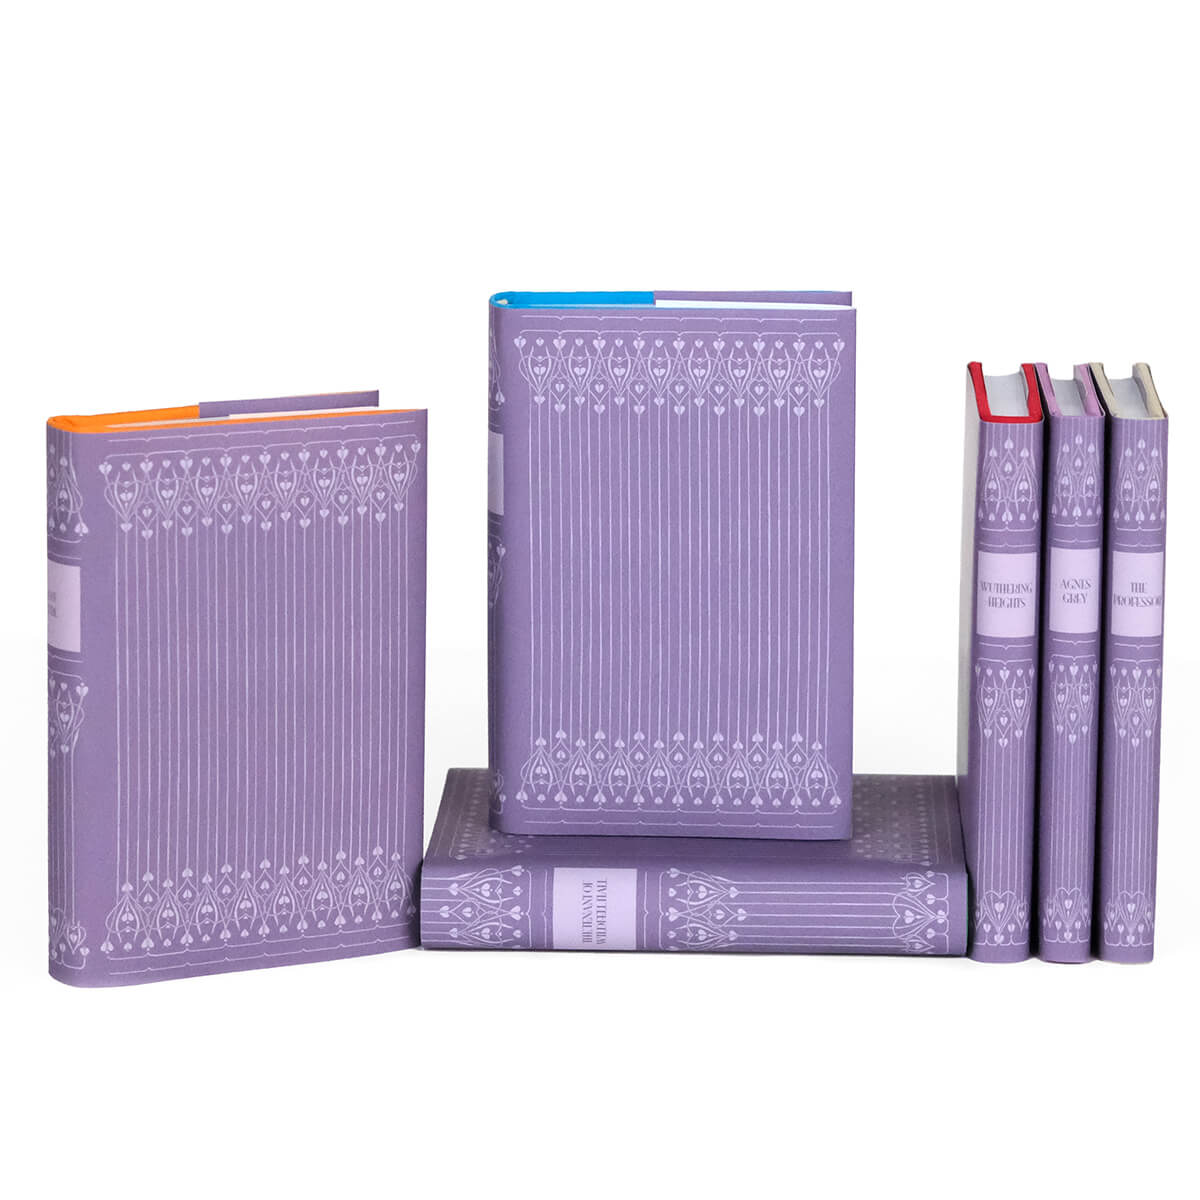 Custom collectible purple dust jackets with ornamental spines designs and book titles. Covers feature an intricate ornamental design in light purple on a darker purple background.